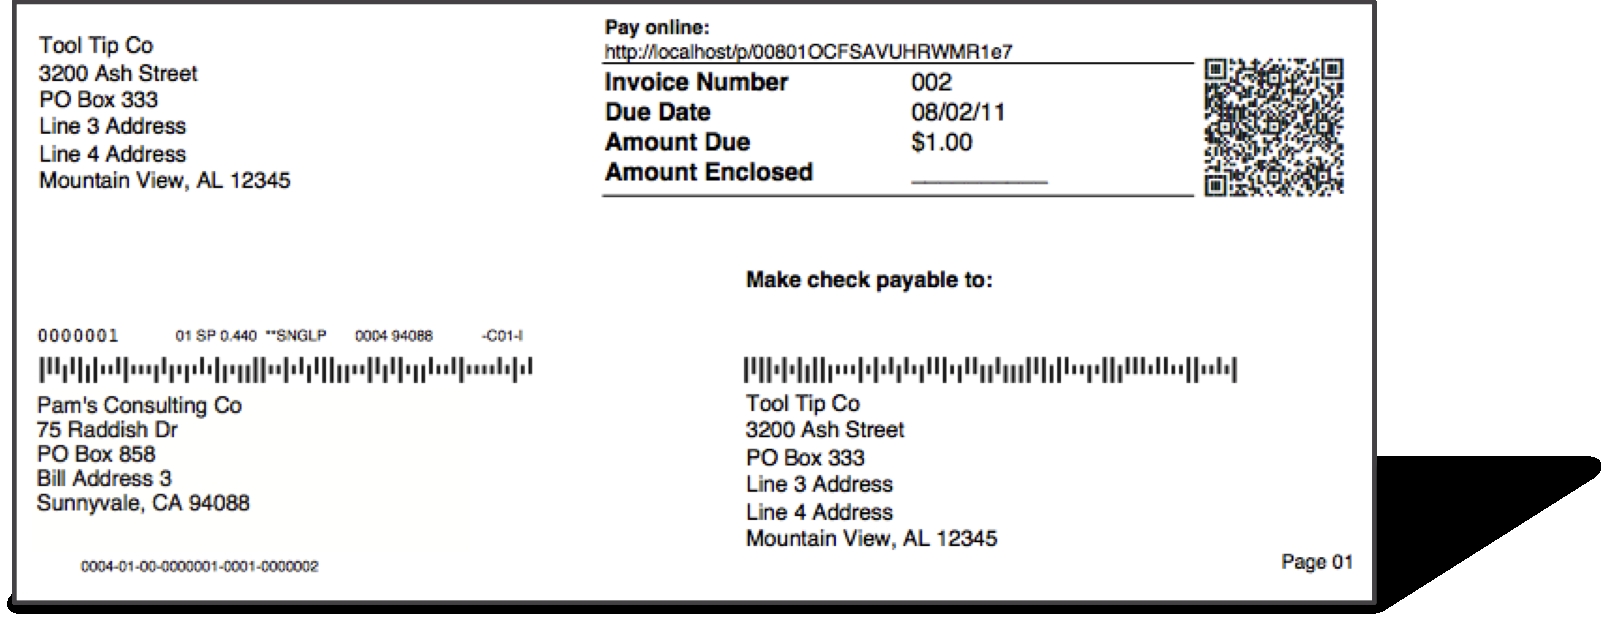 bill launches printed invoice mailing service expands breadth accounts receivable invoice